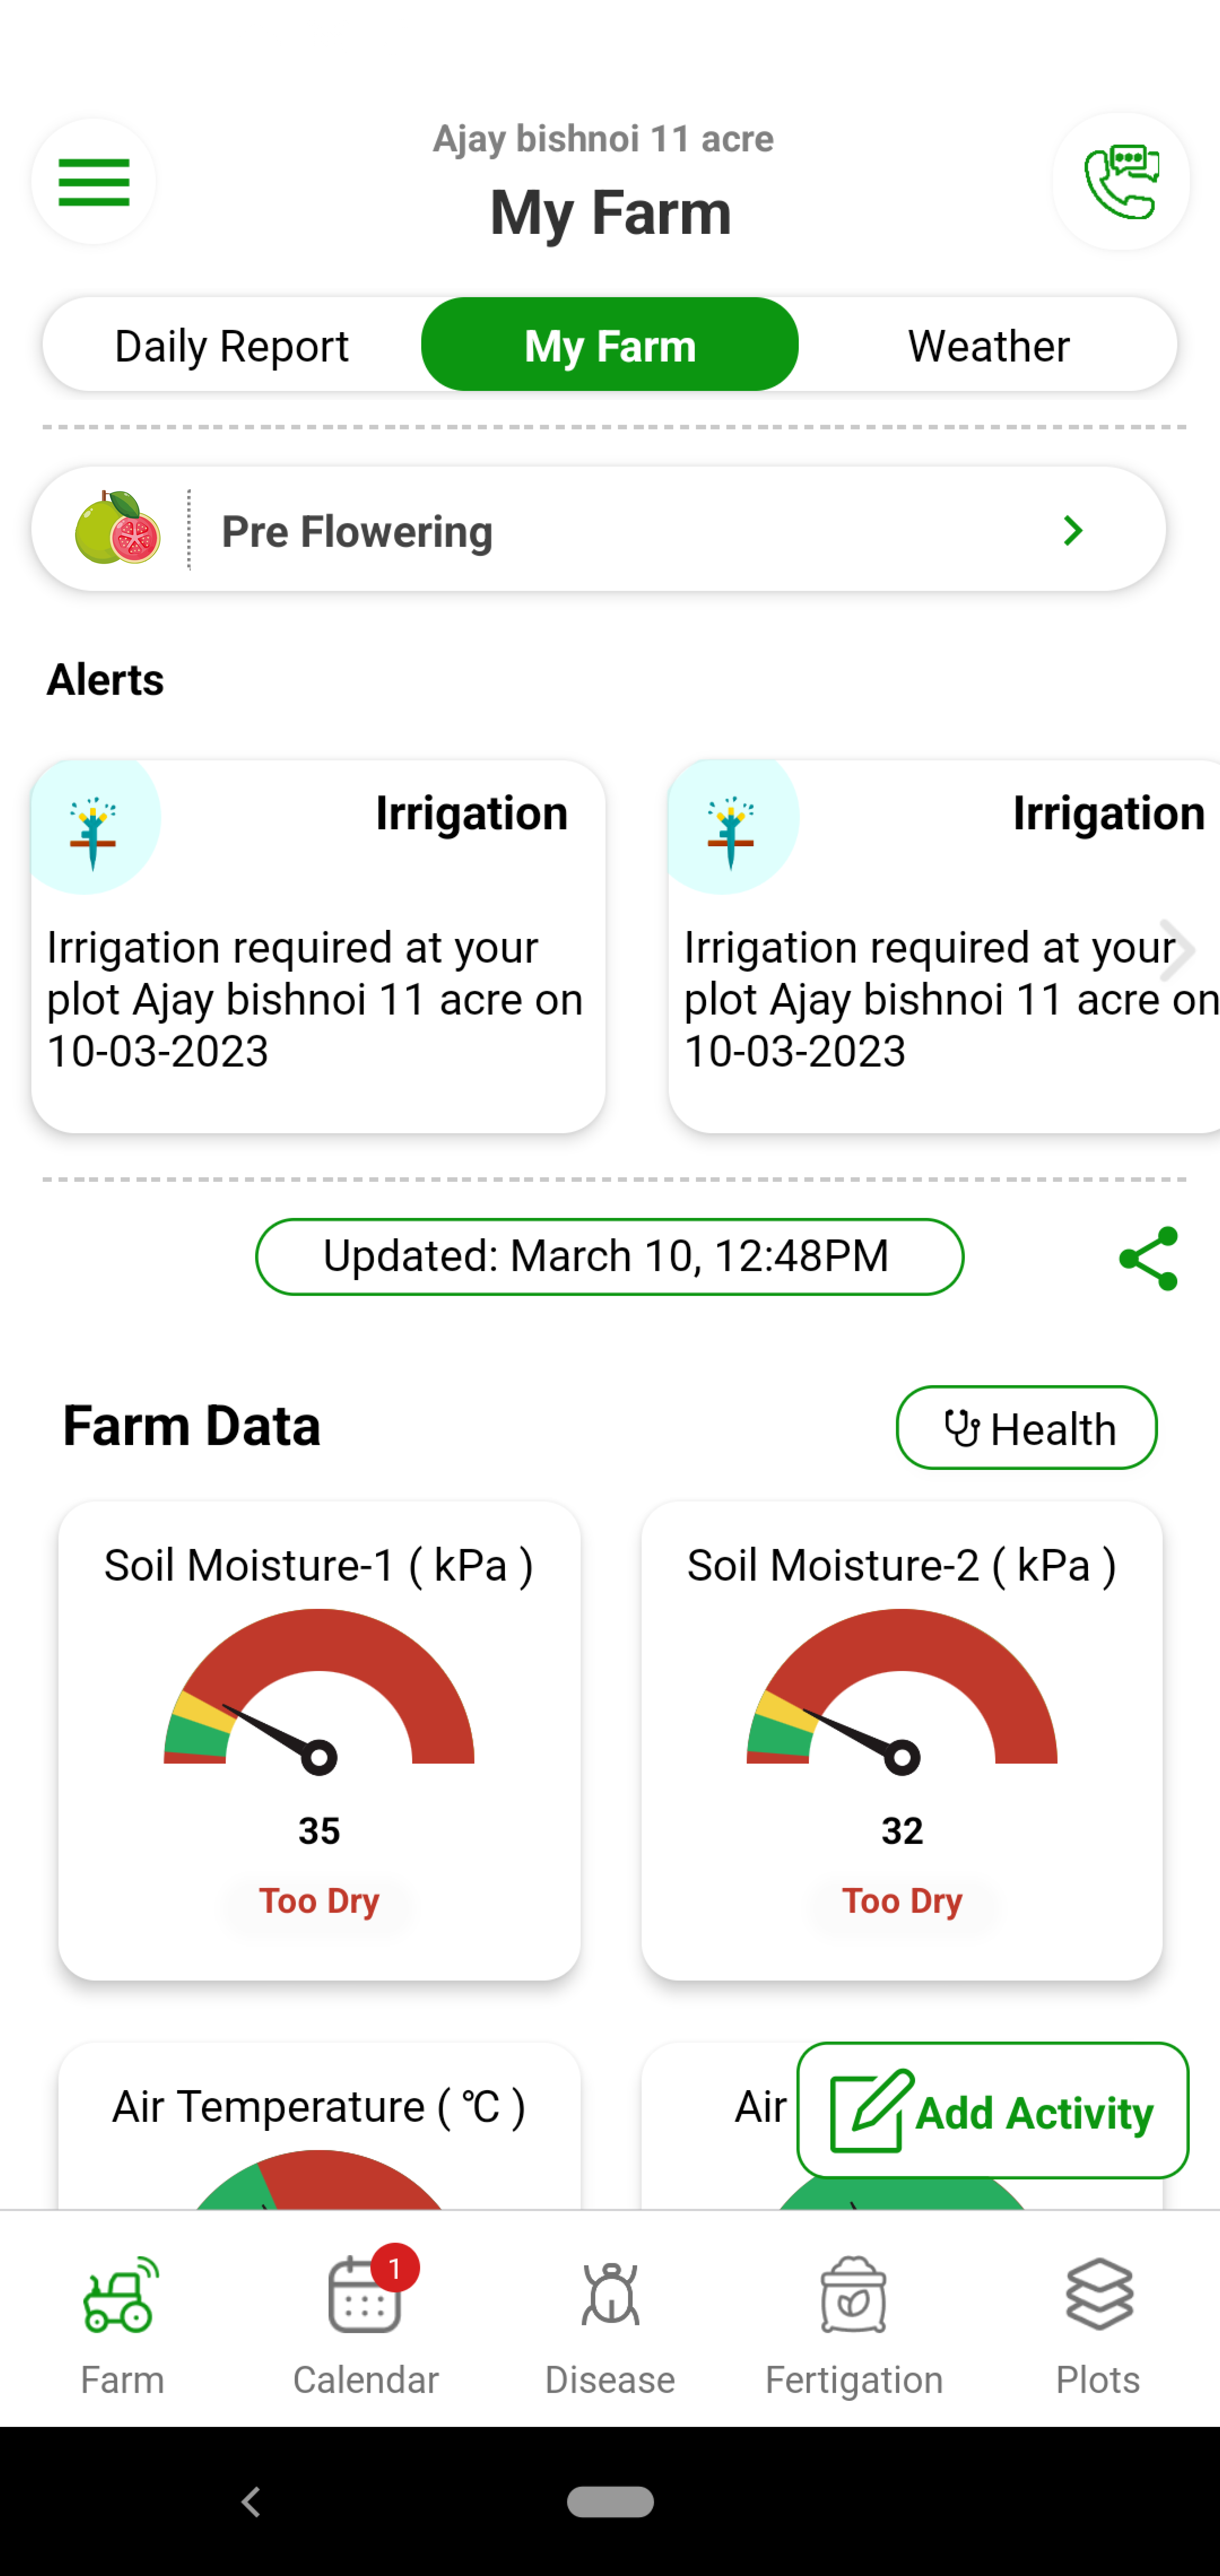 Guava’s water requirements vary based on soil type and stage. With Fyllo’s device containing soil moisture and soil temperature sensor and intelligent software, you get alerts on how much water to provide to the crop. You can also see and visualize evapotranspiration (Etc) values of the crop. You can perfectly manage the water requirements to get the perfect size, color and sugar.